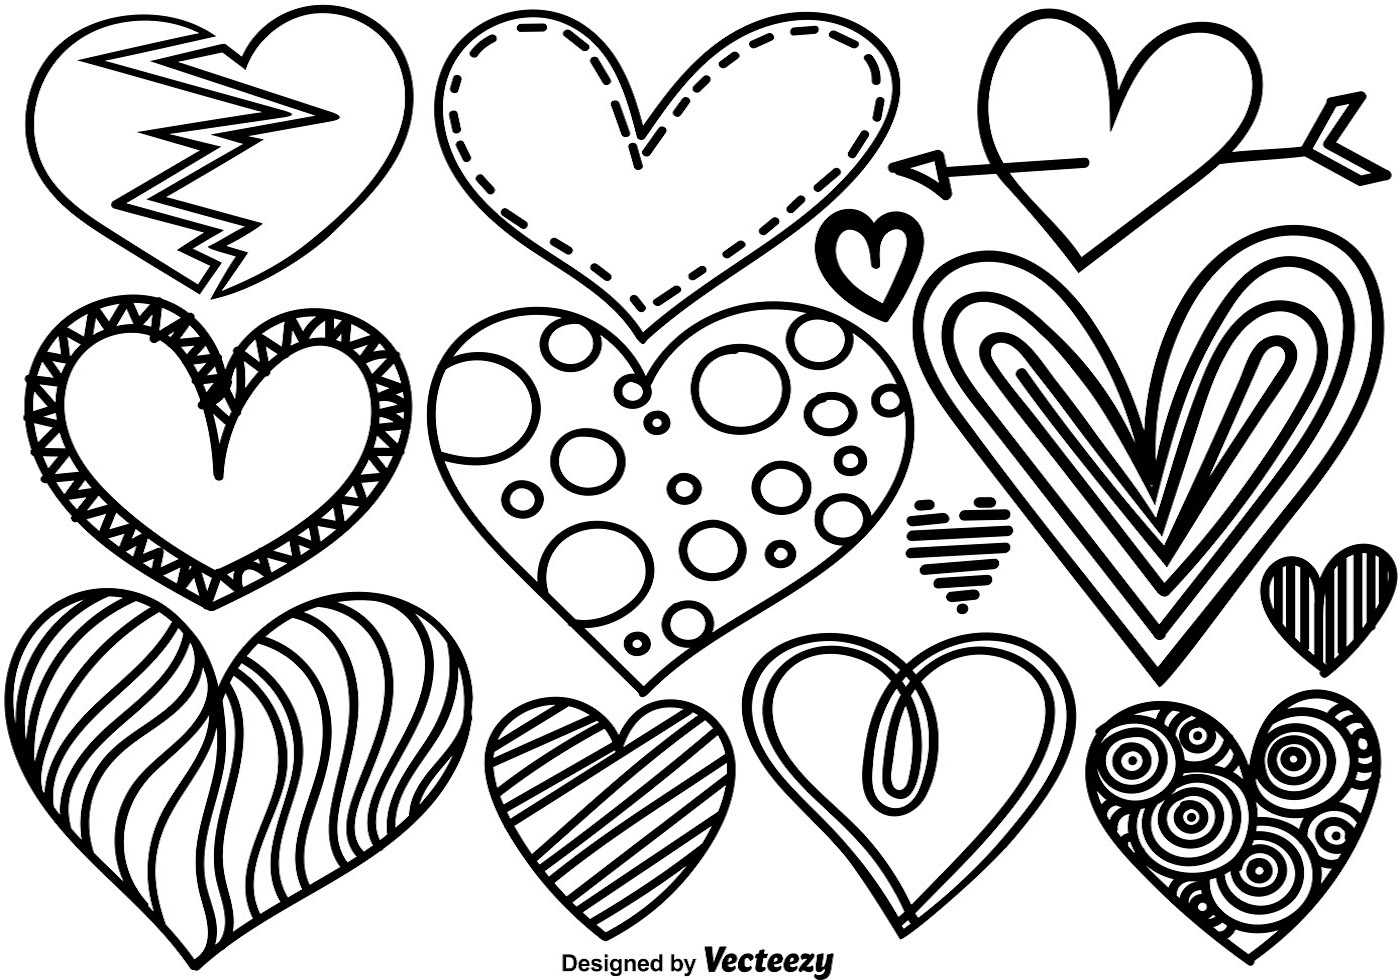 Heart doodle free.